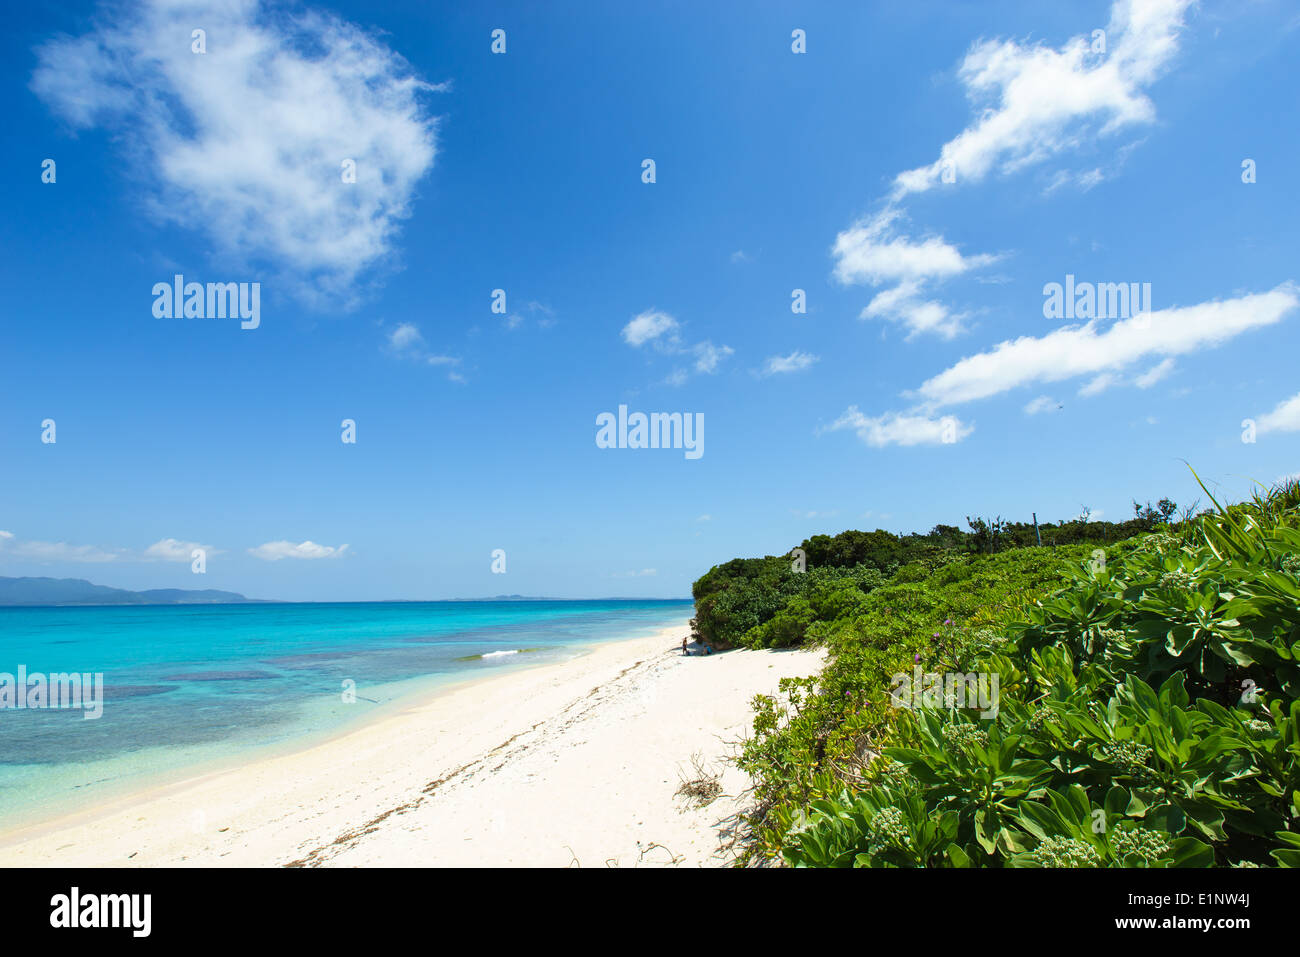 Stunning tropical beach surrounded by crystal clear tropical water full of coral reef in Okinawa, tropical Japan Stock Photo